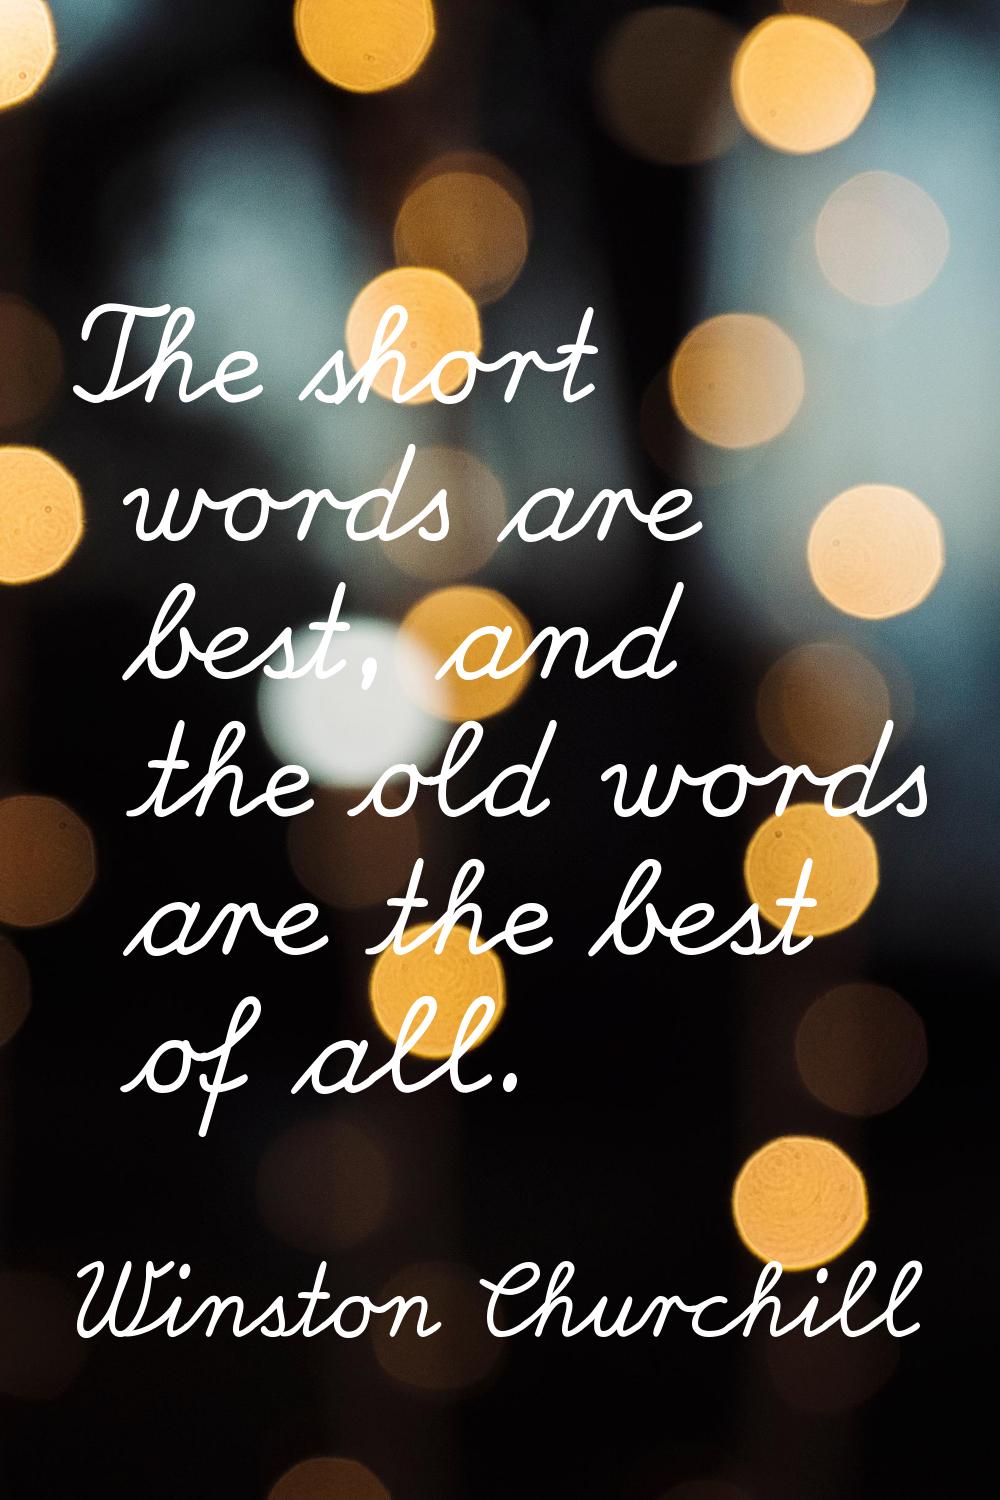 The short words are best, and the old words are the best of all.